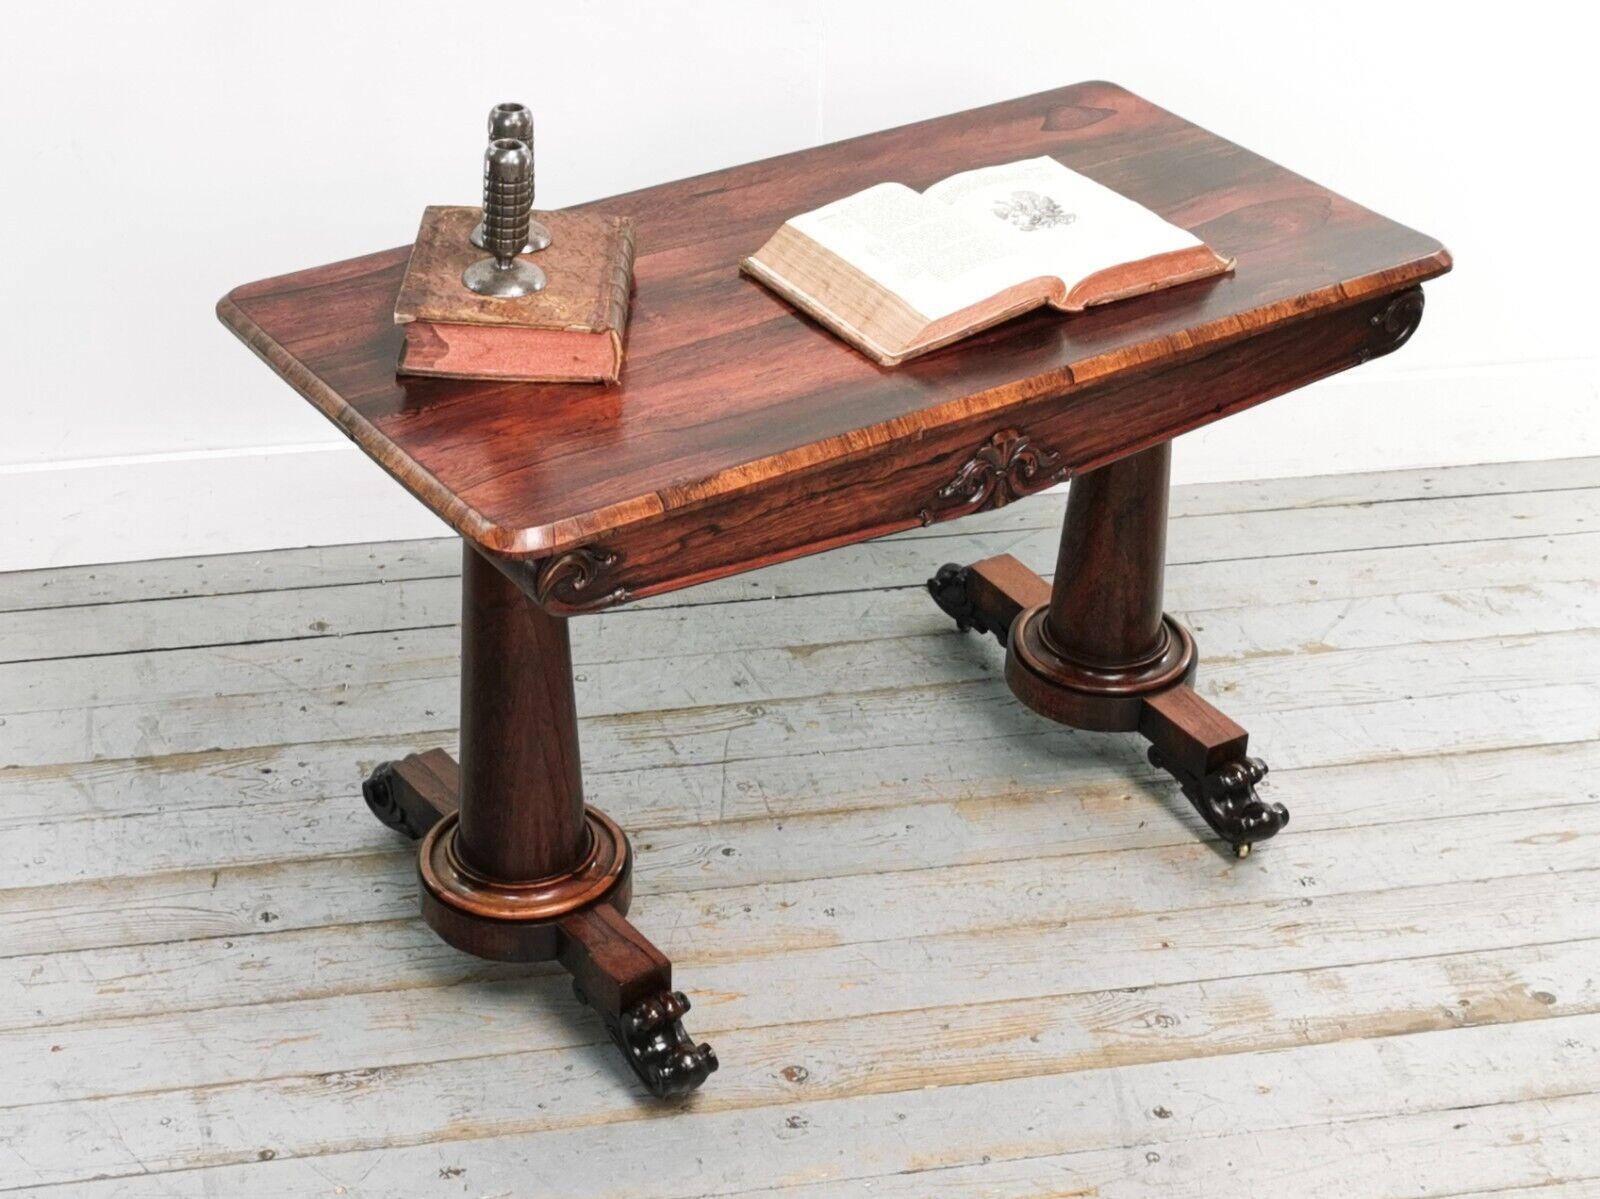 British Colonial Early 19th Century William IV Ornate Rosewood Library Table on Scrolling Feet